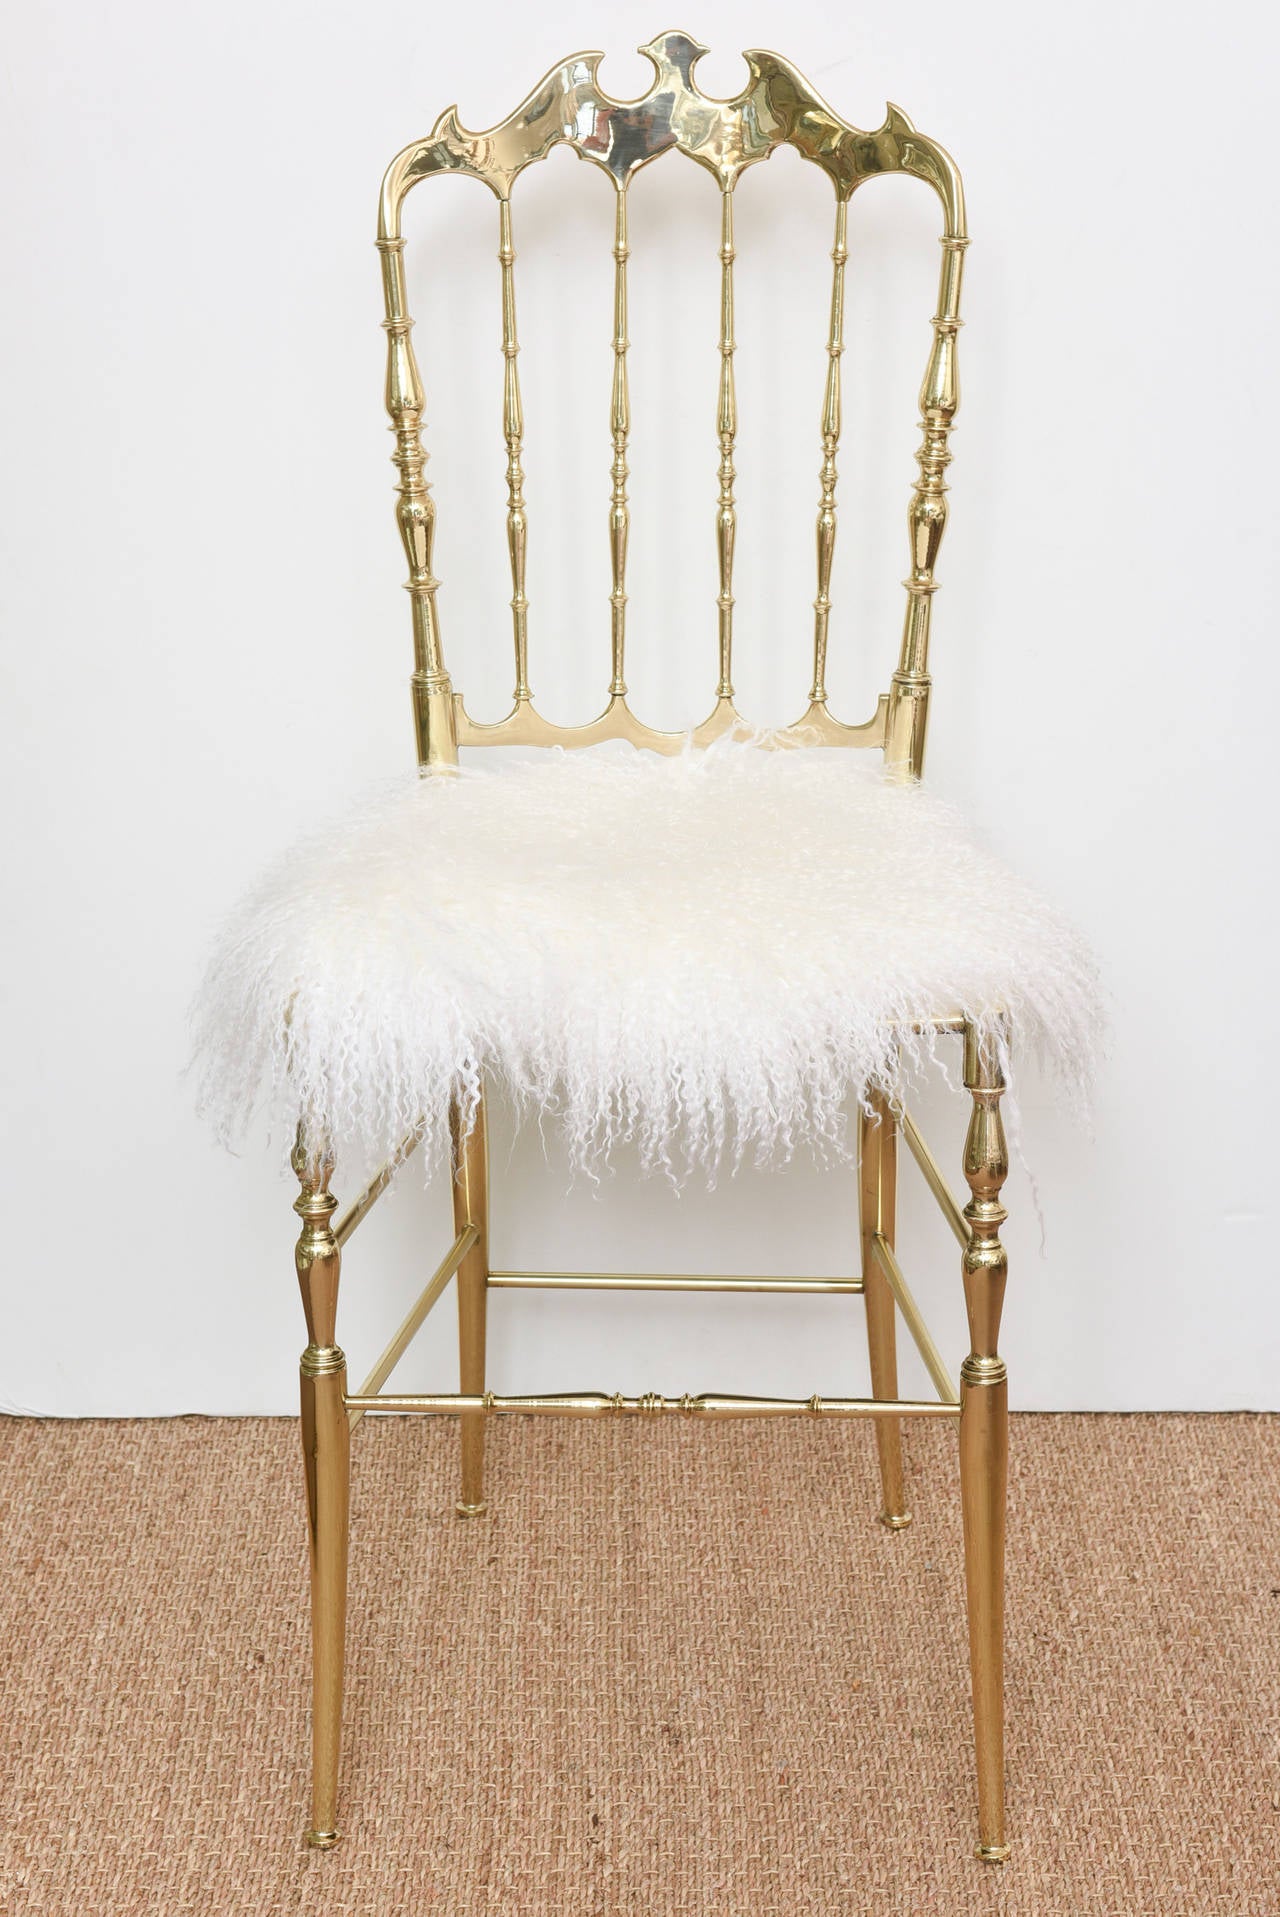 This forever Italian vintage Chiavari polished brass side chair is always timeless and makes a statement. The new upholstery is real bleached white Mongolian lamb. The entire chair has been newly professional polished and lacquered.
It glistens...